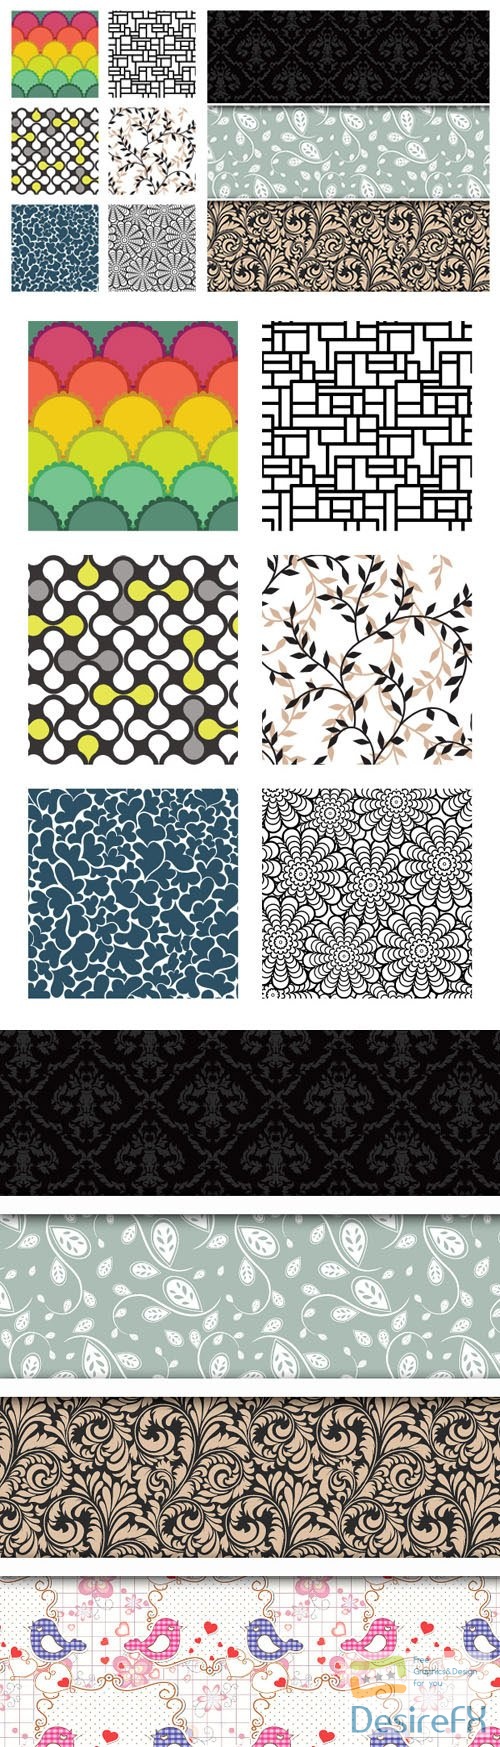 Geometric Patterns Vector Templates Collection